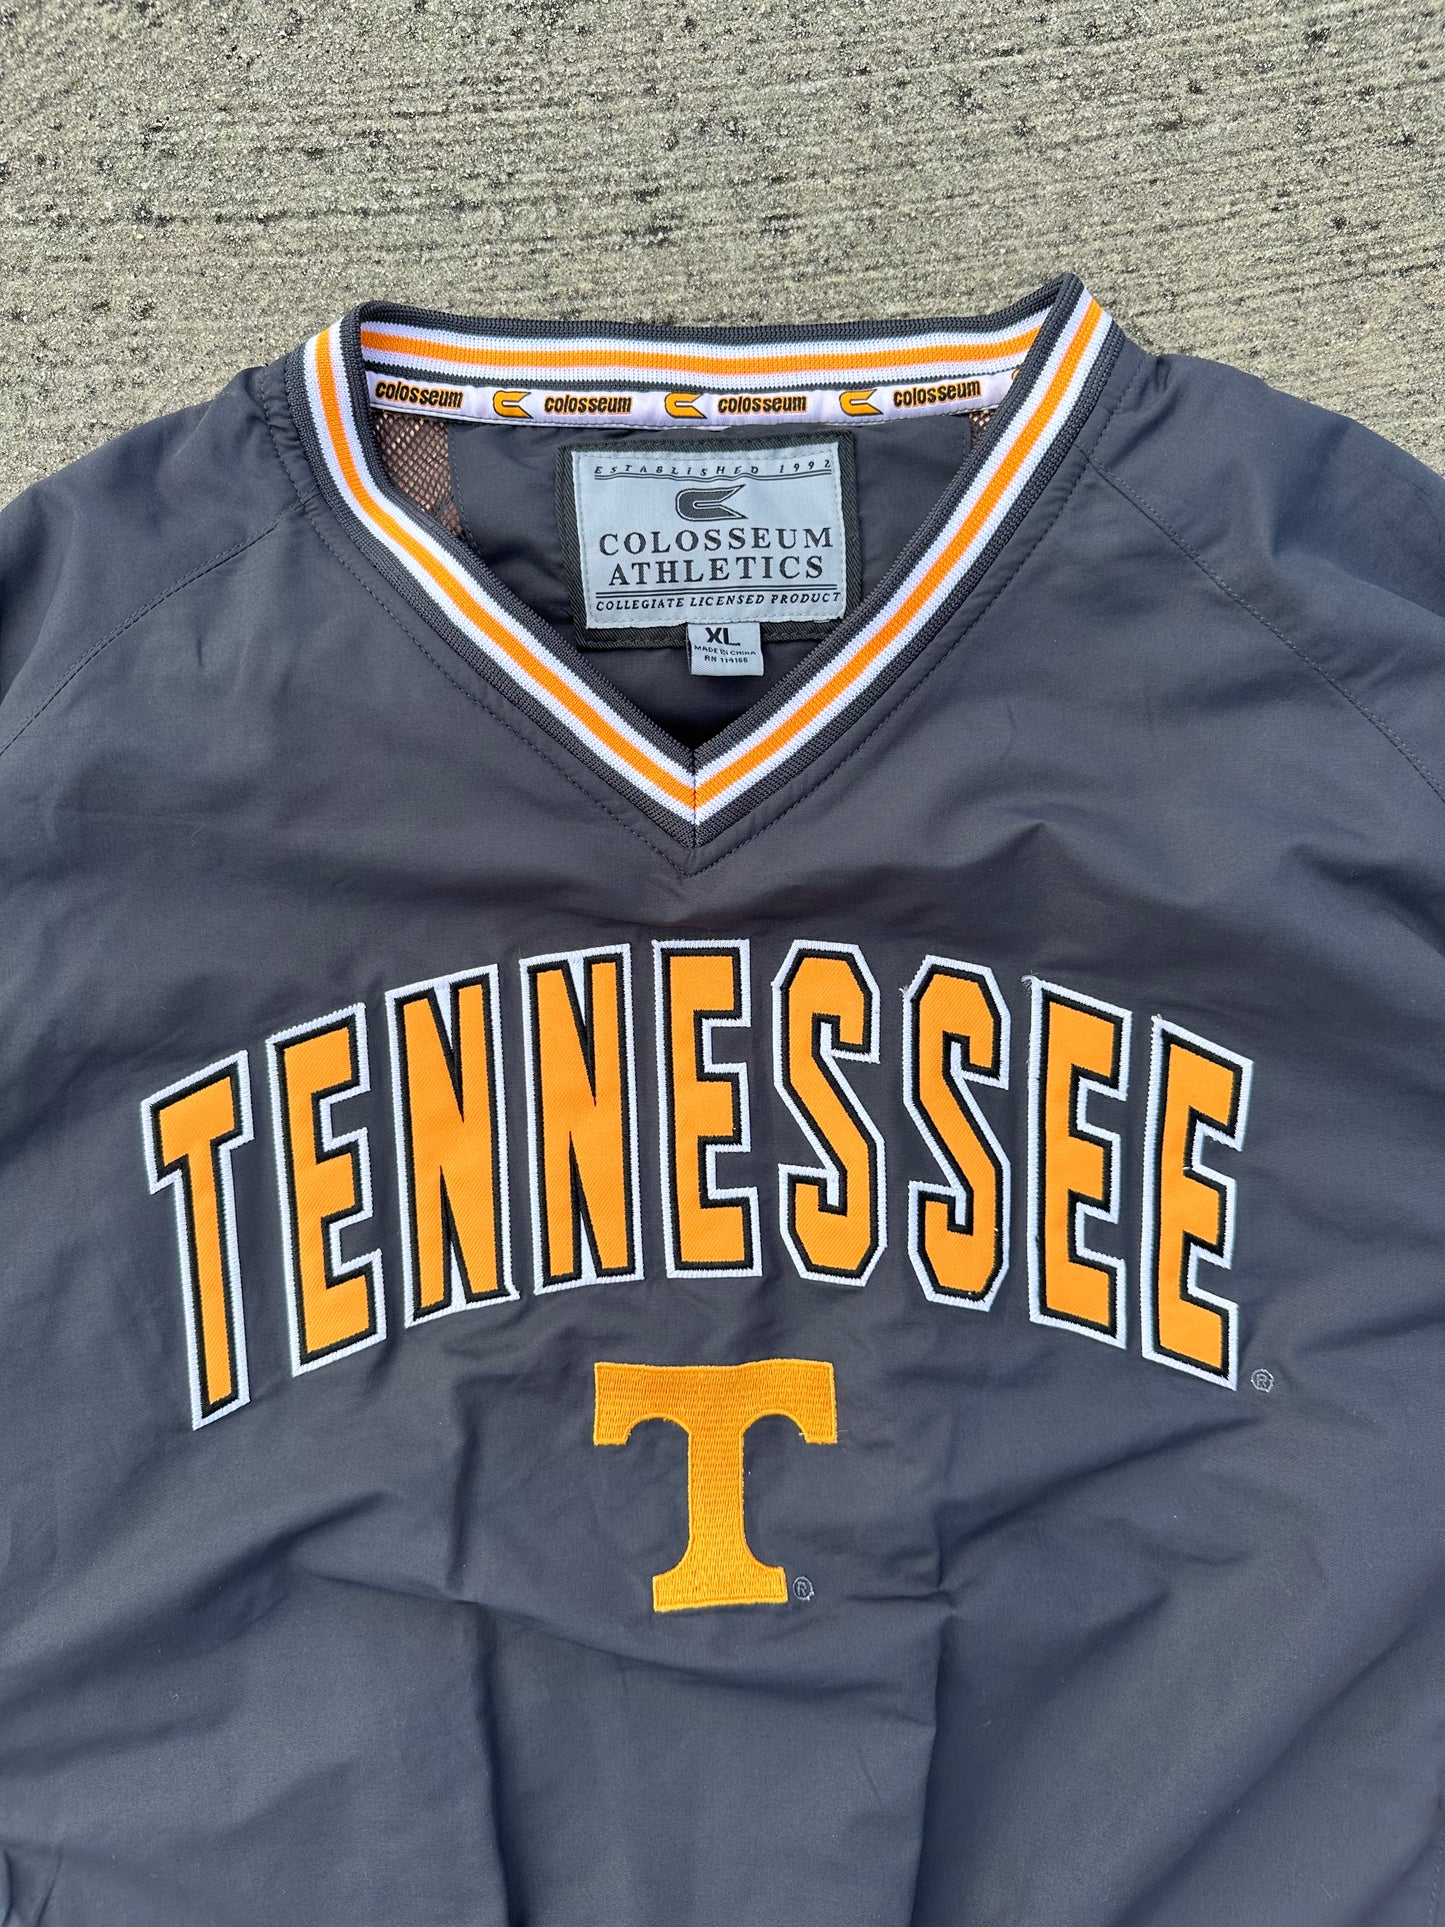 COLOSSEUM UNIVERSITY OF TENNESSEE PULLOVER JACKET — XL